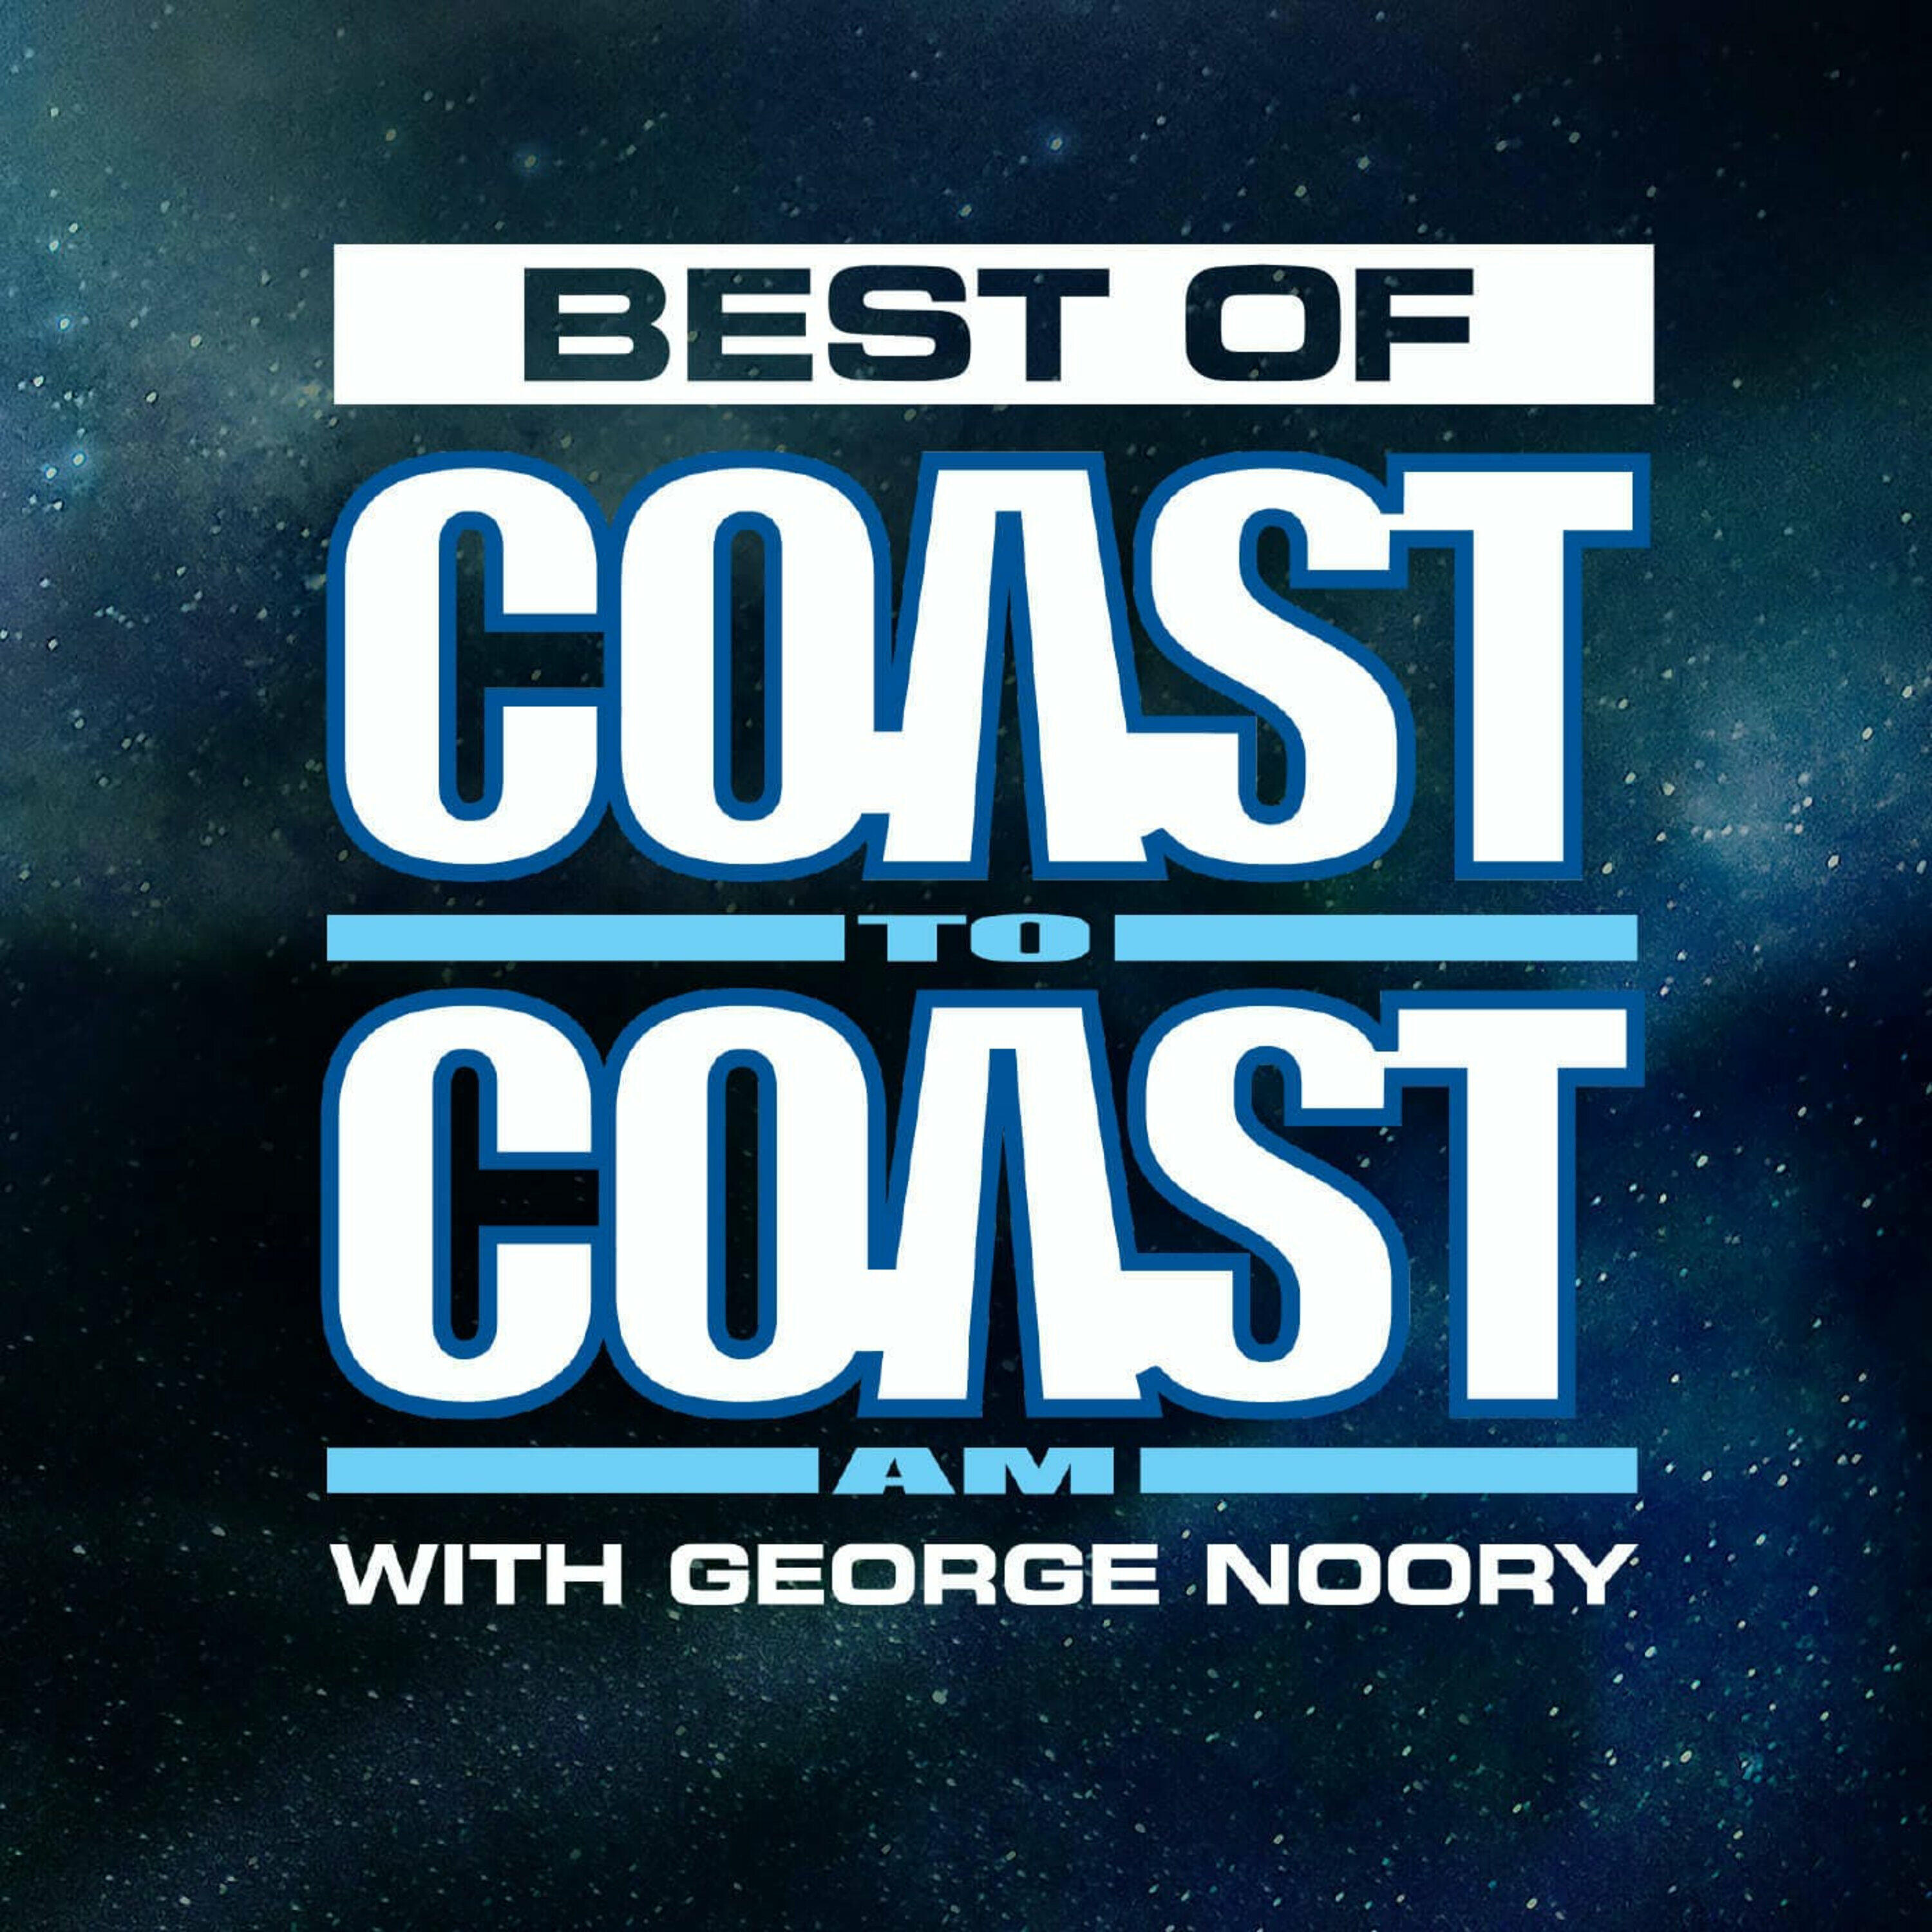 Were Humans Created by God or Aliens? - Best of Coast to Coast AM - 2/18/20 - The Best of Coast to Coast AM | iHeart